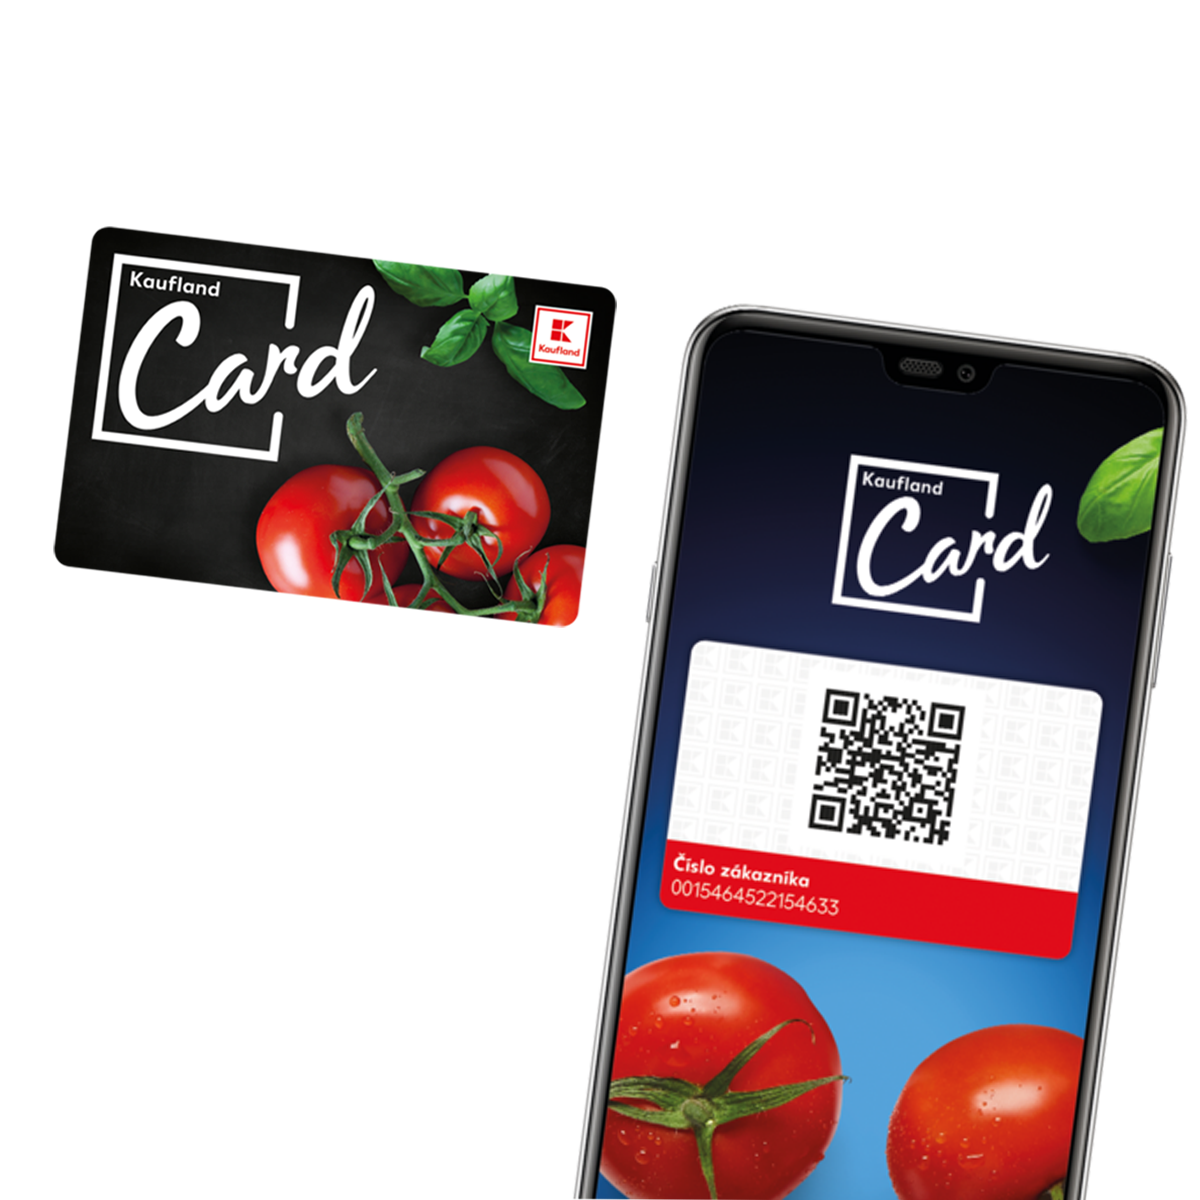 Kaufland Card launches in Slovakia